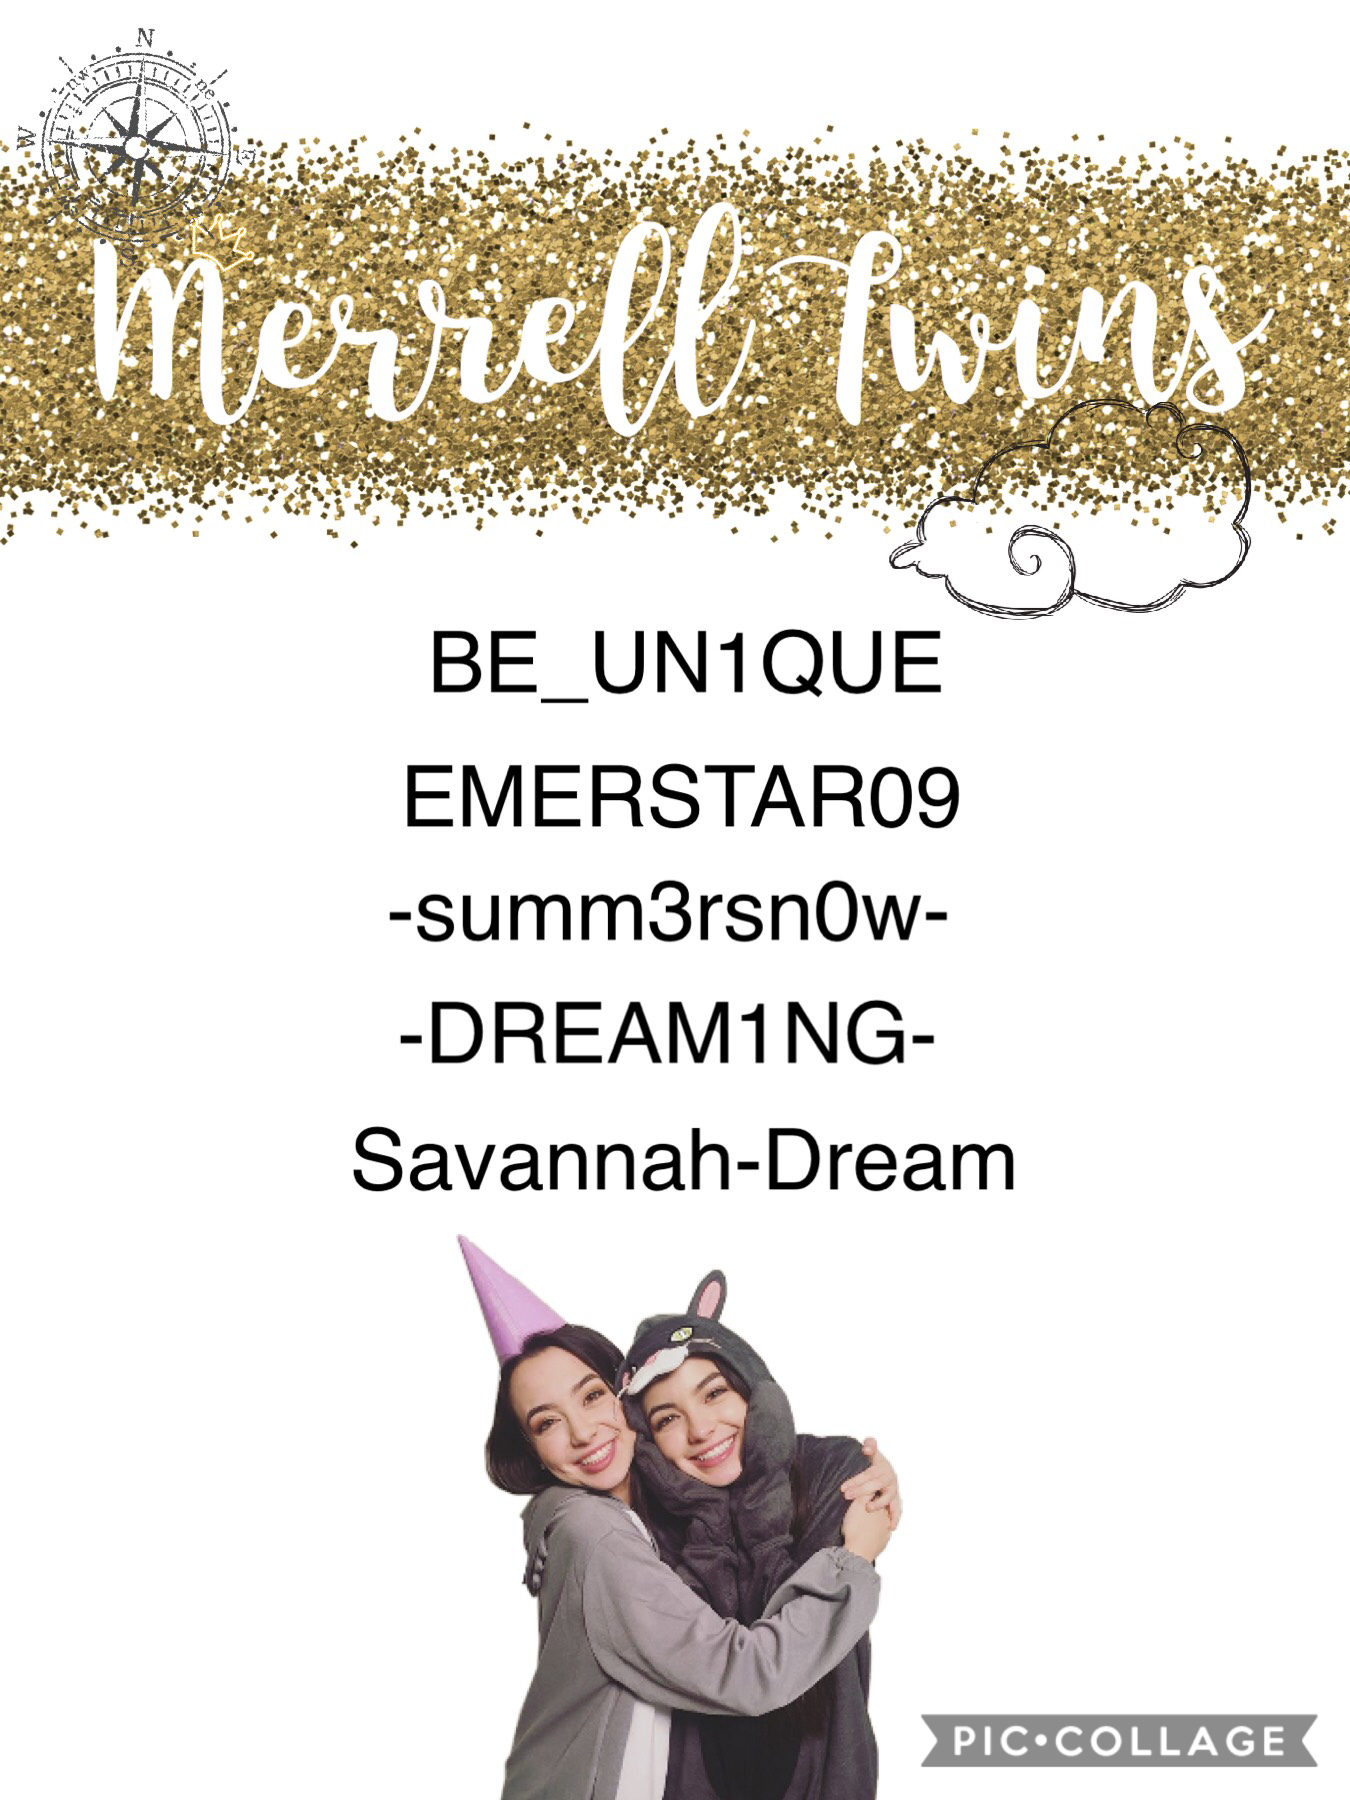 Team Merrell Twins!! Please let me know if I did not spell your username correctly. The games will start after two more people sign up so tell your friends!